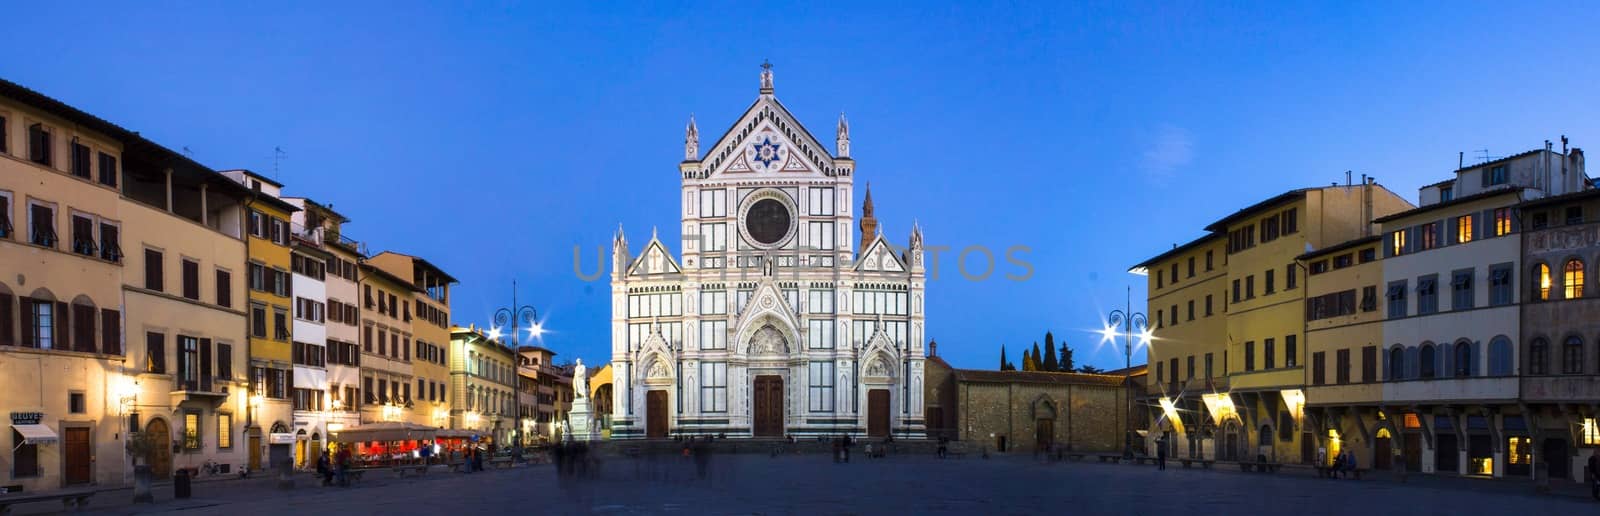 The Basilica of Santa Croce, in the homonymous square in Florence, is one of the largest churches officiated by the Franciscans